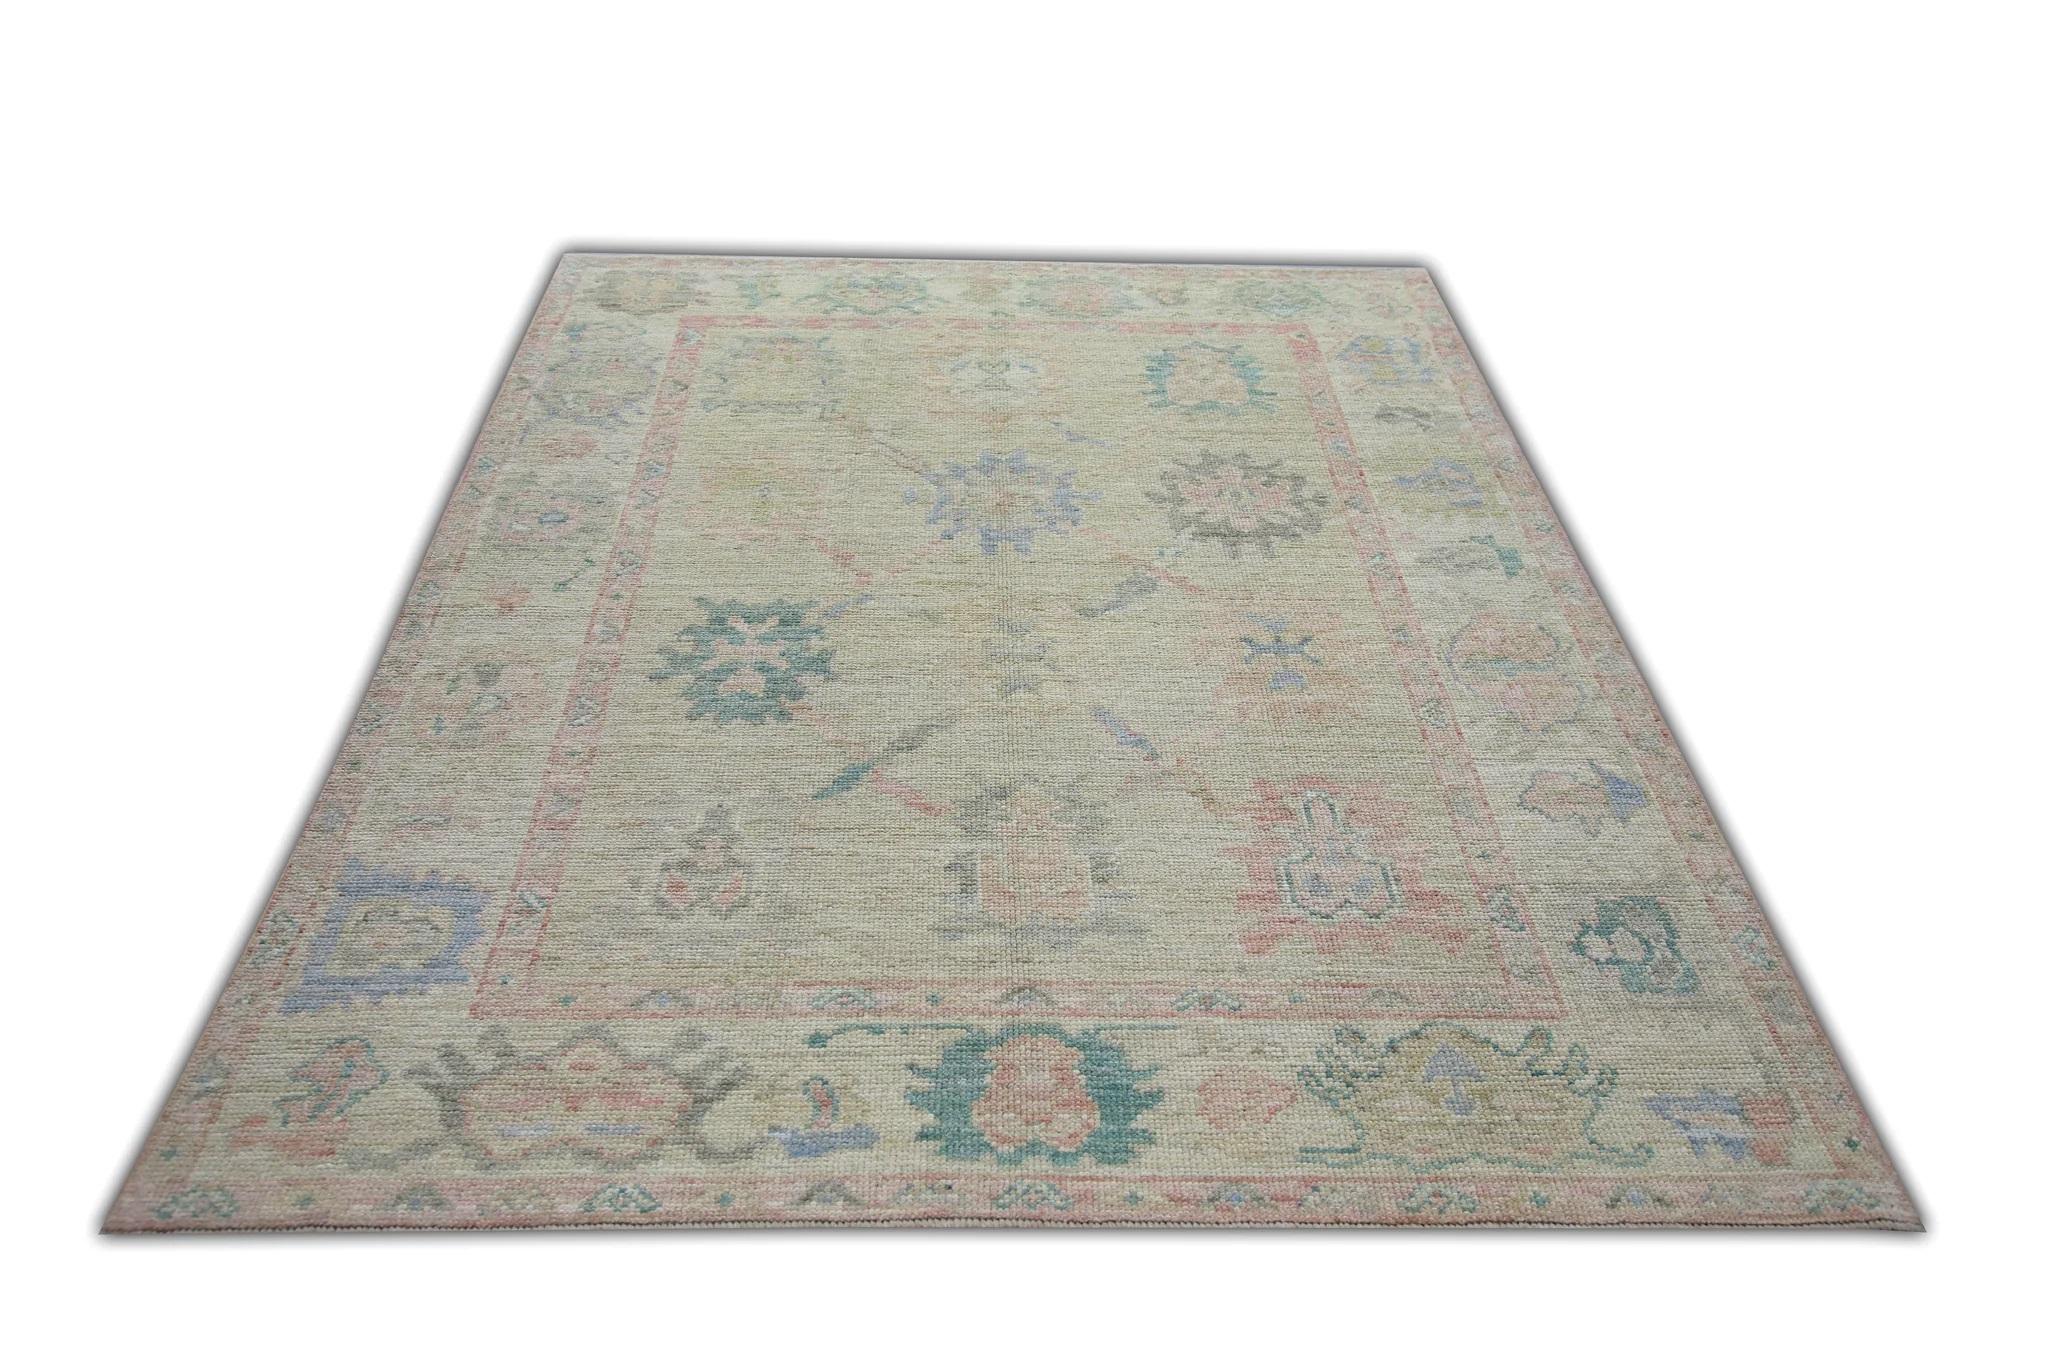 Contemporary Multicolor Floral Handwoven Wool Turkish Oushak Rug 5' x 6'9